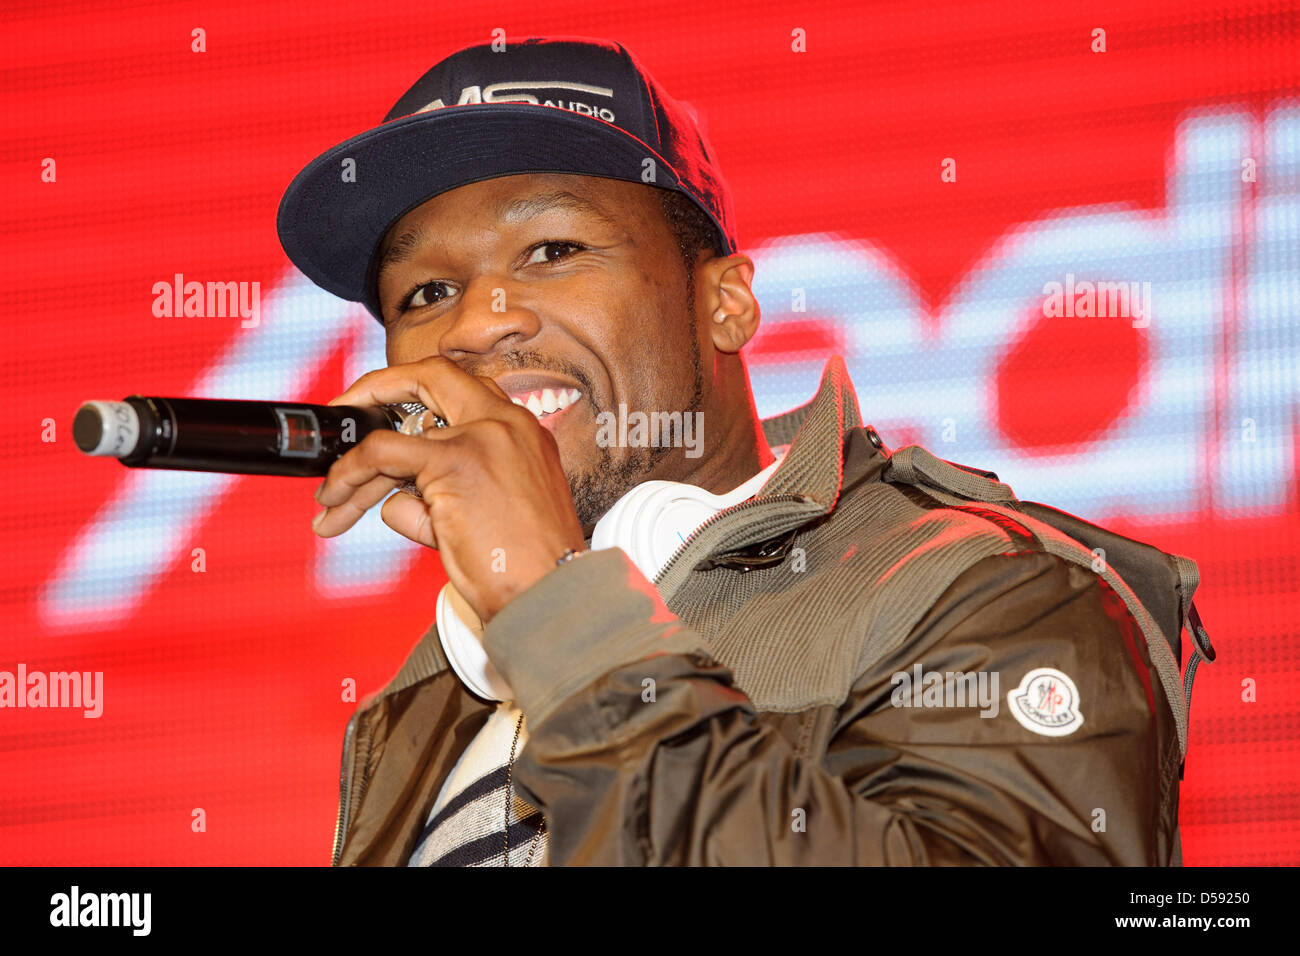 Berlin, Germany. 26th March 2013. US rapper Curtis James Jackson III aka '50 Cent' comes in Berlin to an autograph session.Credit: dpa picture alliance / Alamy Live News Stock Photo